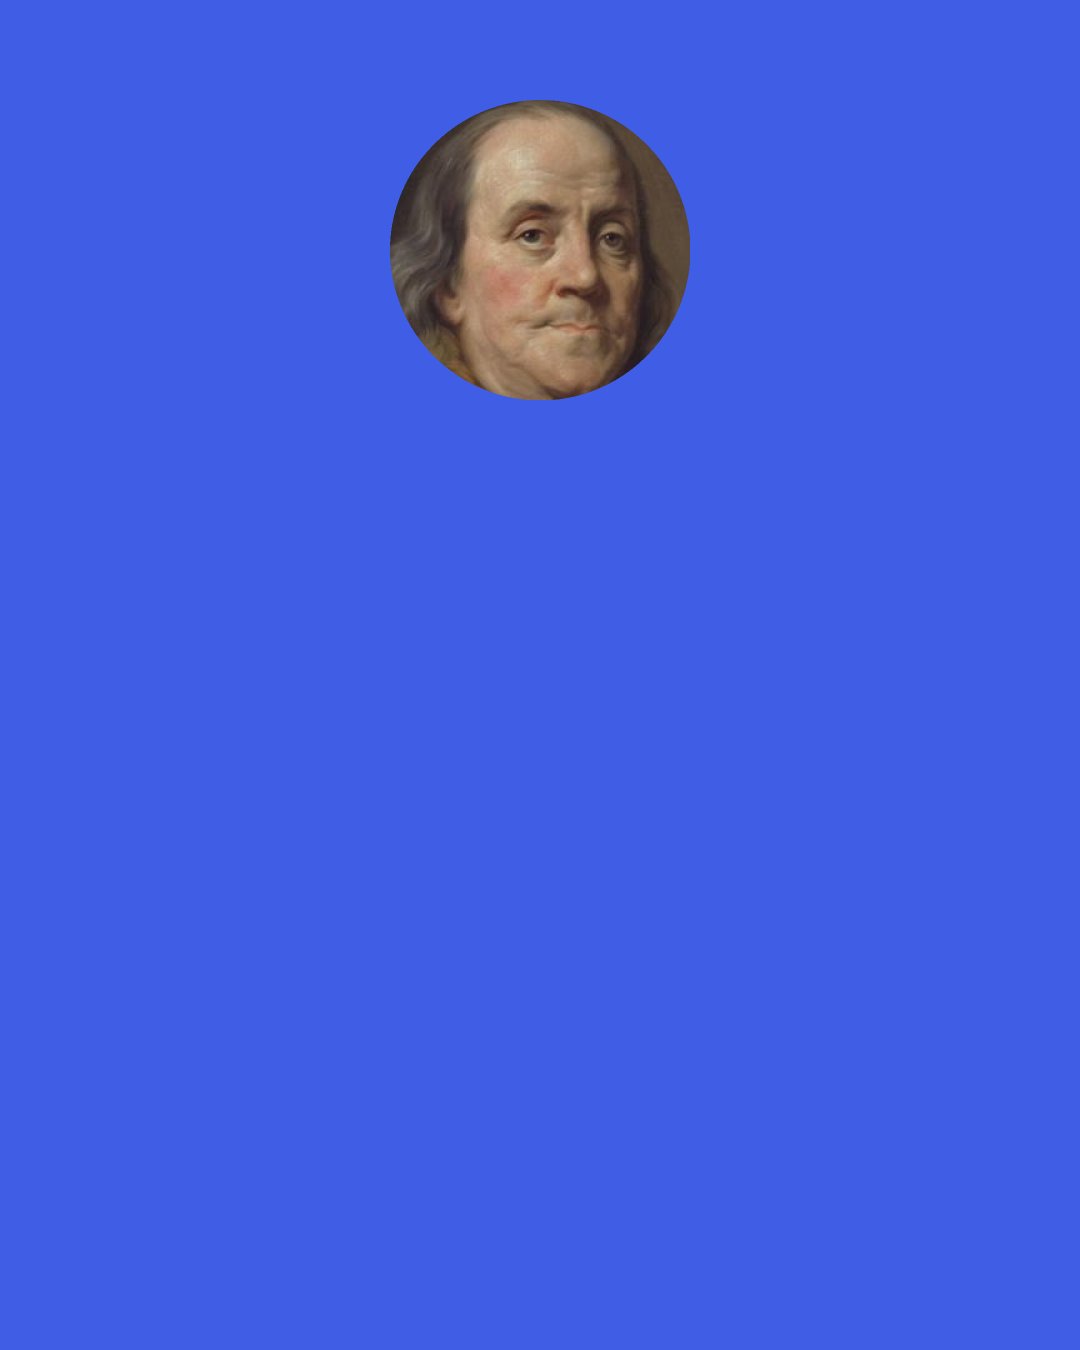 Benjamin Franklin: Early to bed and early to rise, makes a man healthy, wealthy and wise." He planned his routine around waking up at 5 a.m. and asking himself "What good shall I do this day?